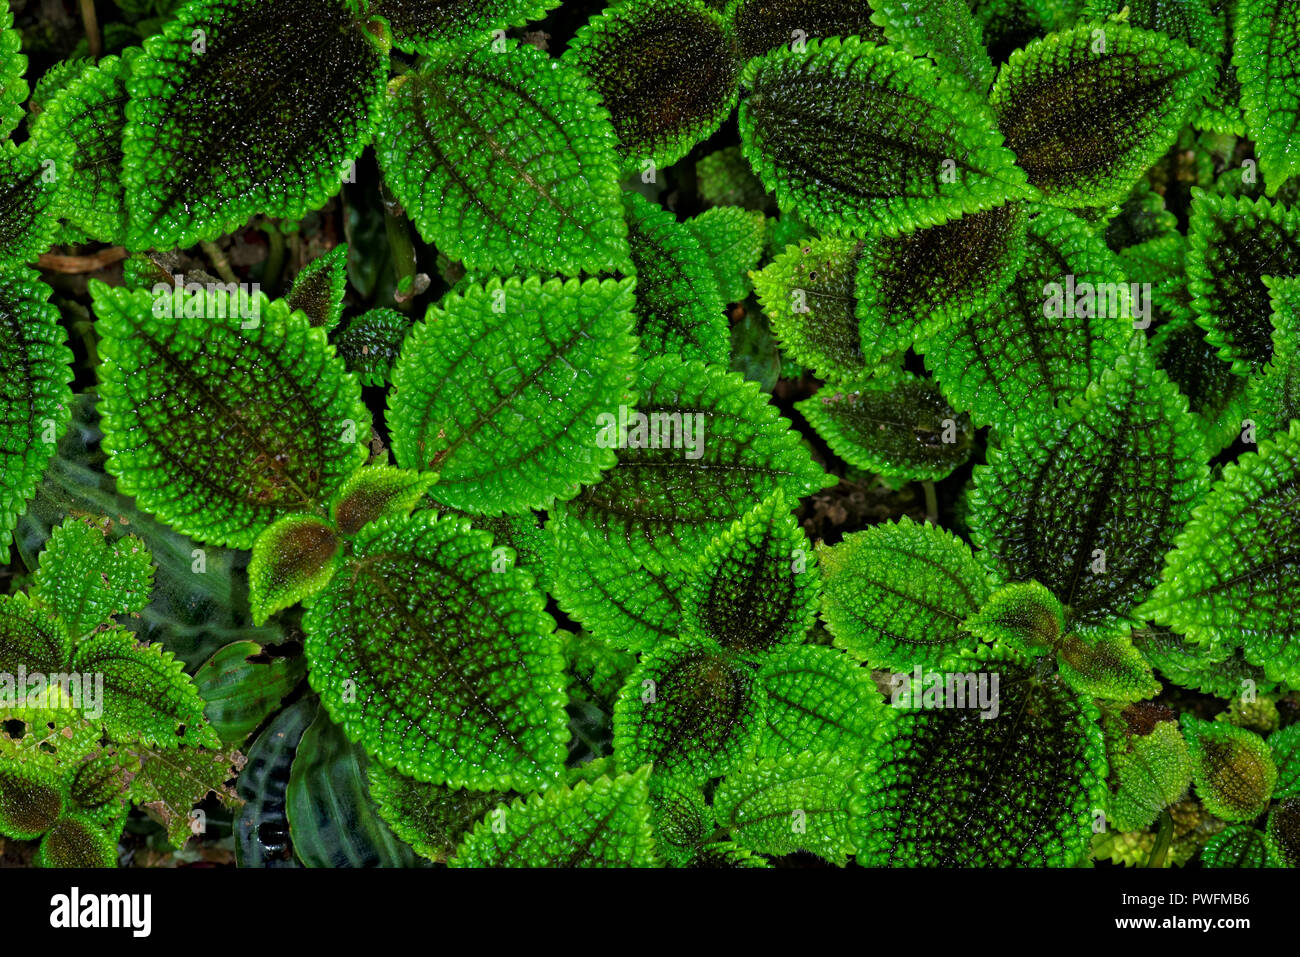 Pilea mollis is a species of flowering plant in the family Urticaceae. It is used as an ornamental plant, particularly the cultivar 'Moon Valley'. Stock Photo